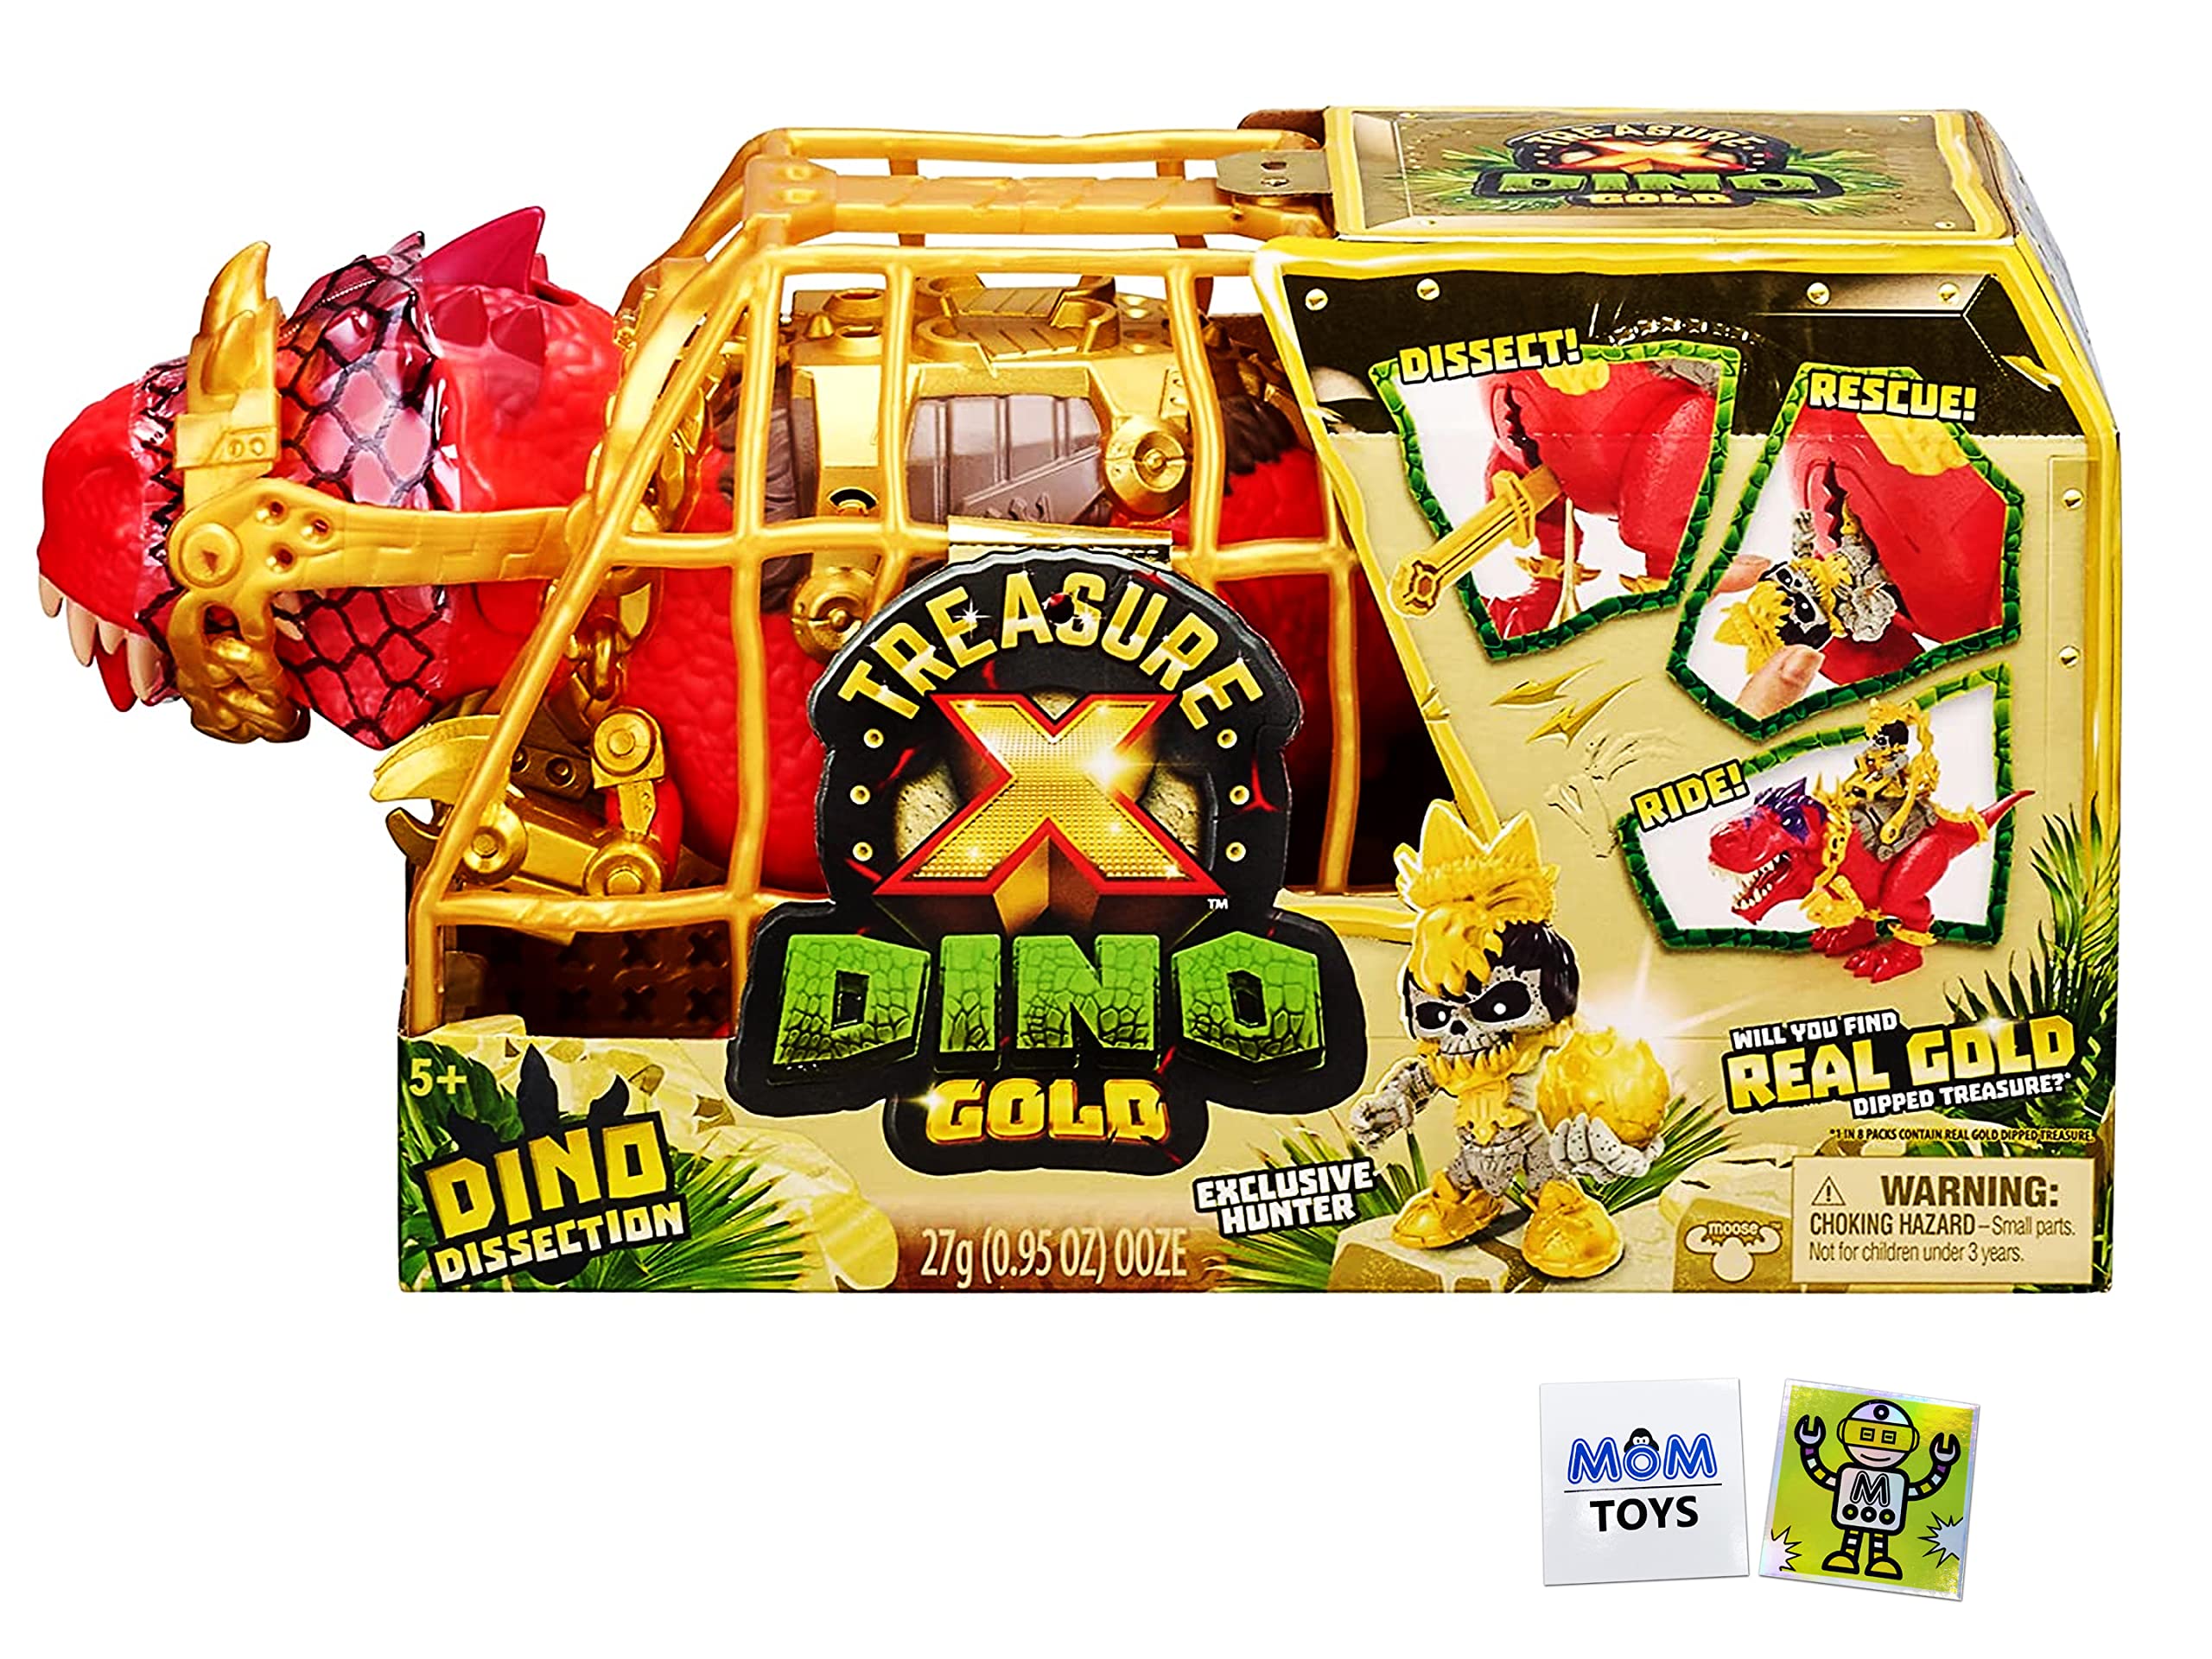 Treasure X Dino Gold Dinosaur Dissection - T-Rex Dino Unboxing Adventure Bundle - My Outlet Mallステッカー2枚でスタイルが異なる場合があります